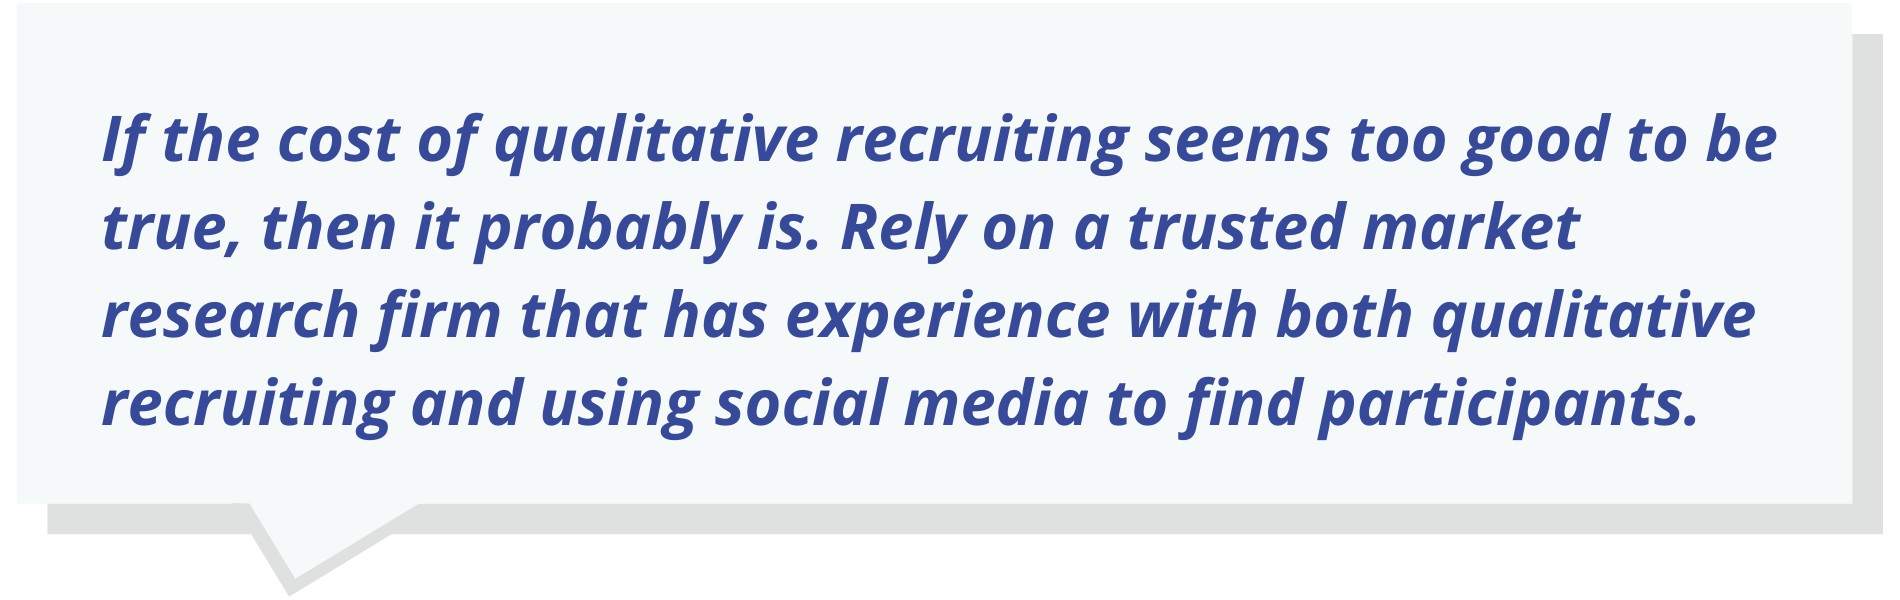 If the cost of qualitative recruiting seems too good to be true, then it probably is. Rely on a trusted market research firm that has experience with both qualitative recruiting and using social media to find participants.